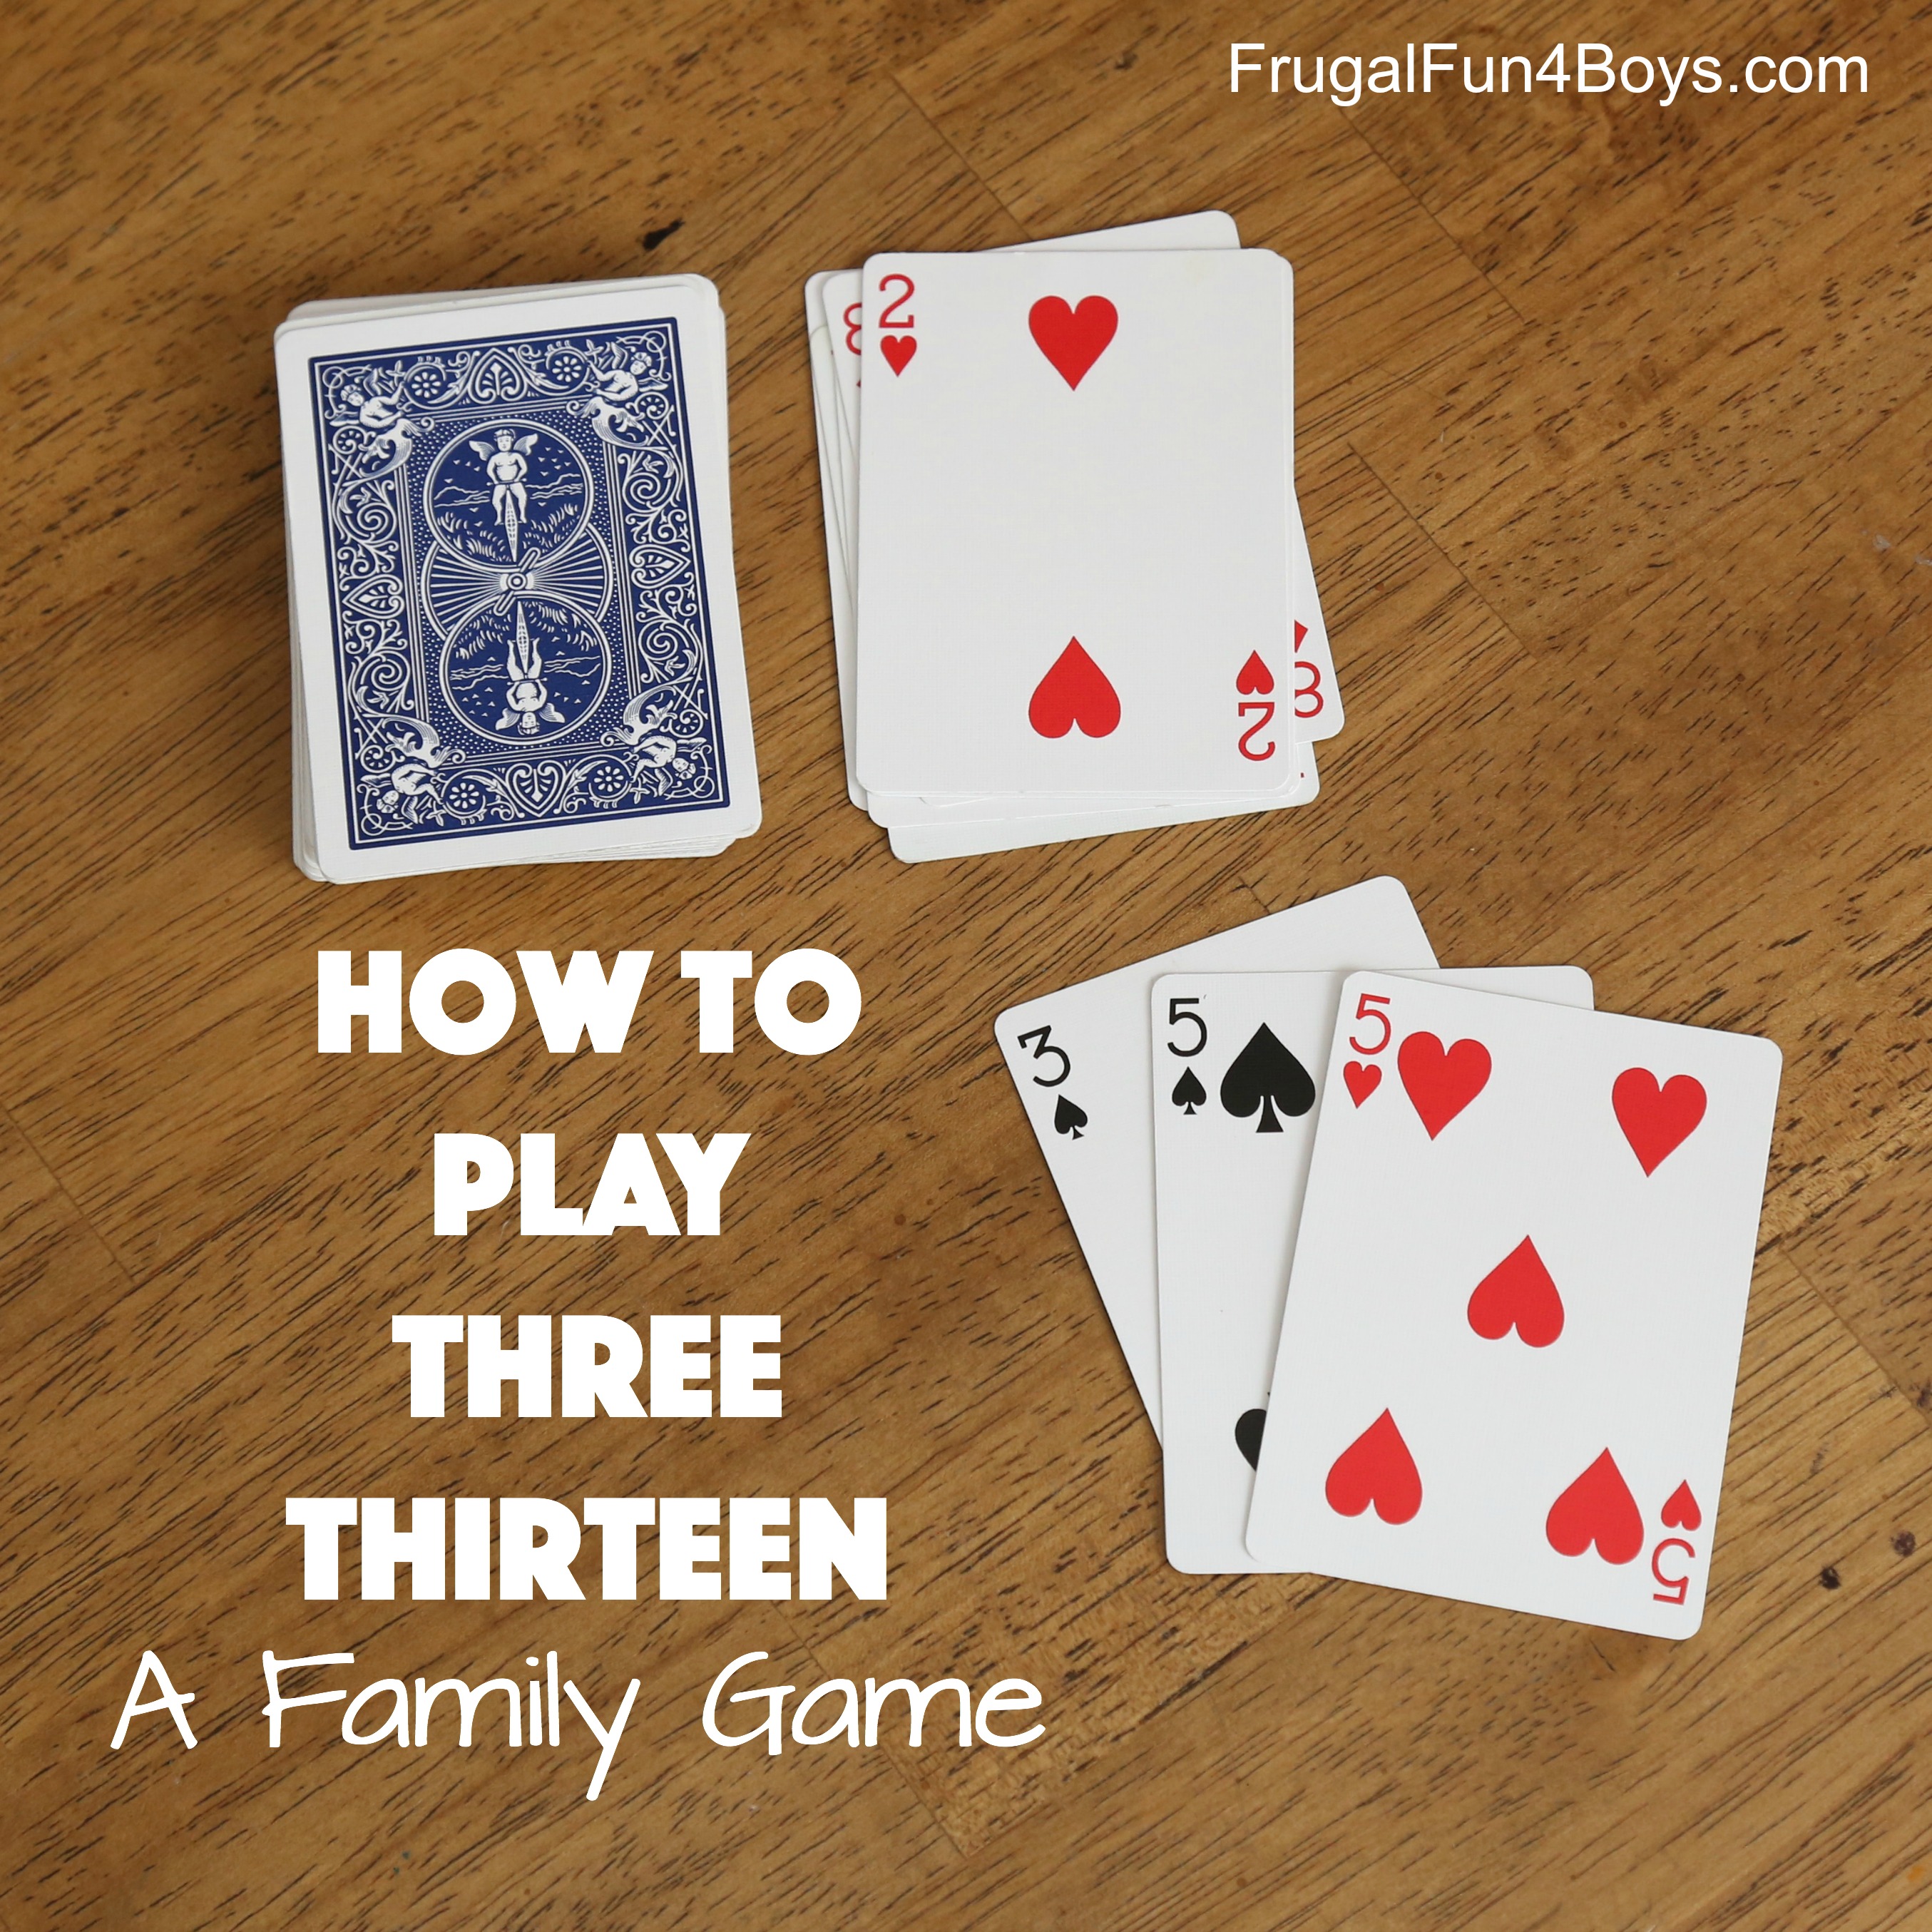 How Do You Play The Card Game Sets And Runs Rummy Rules Learn How To